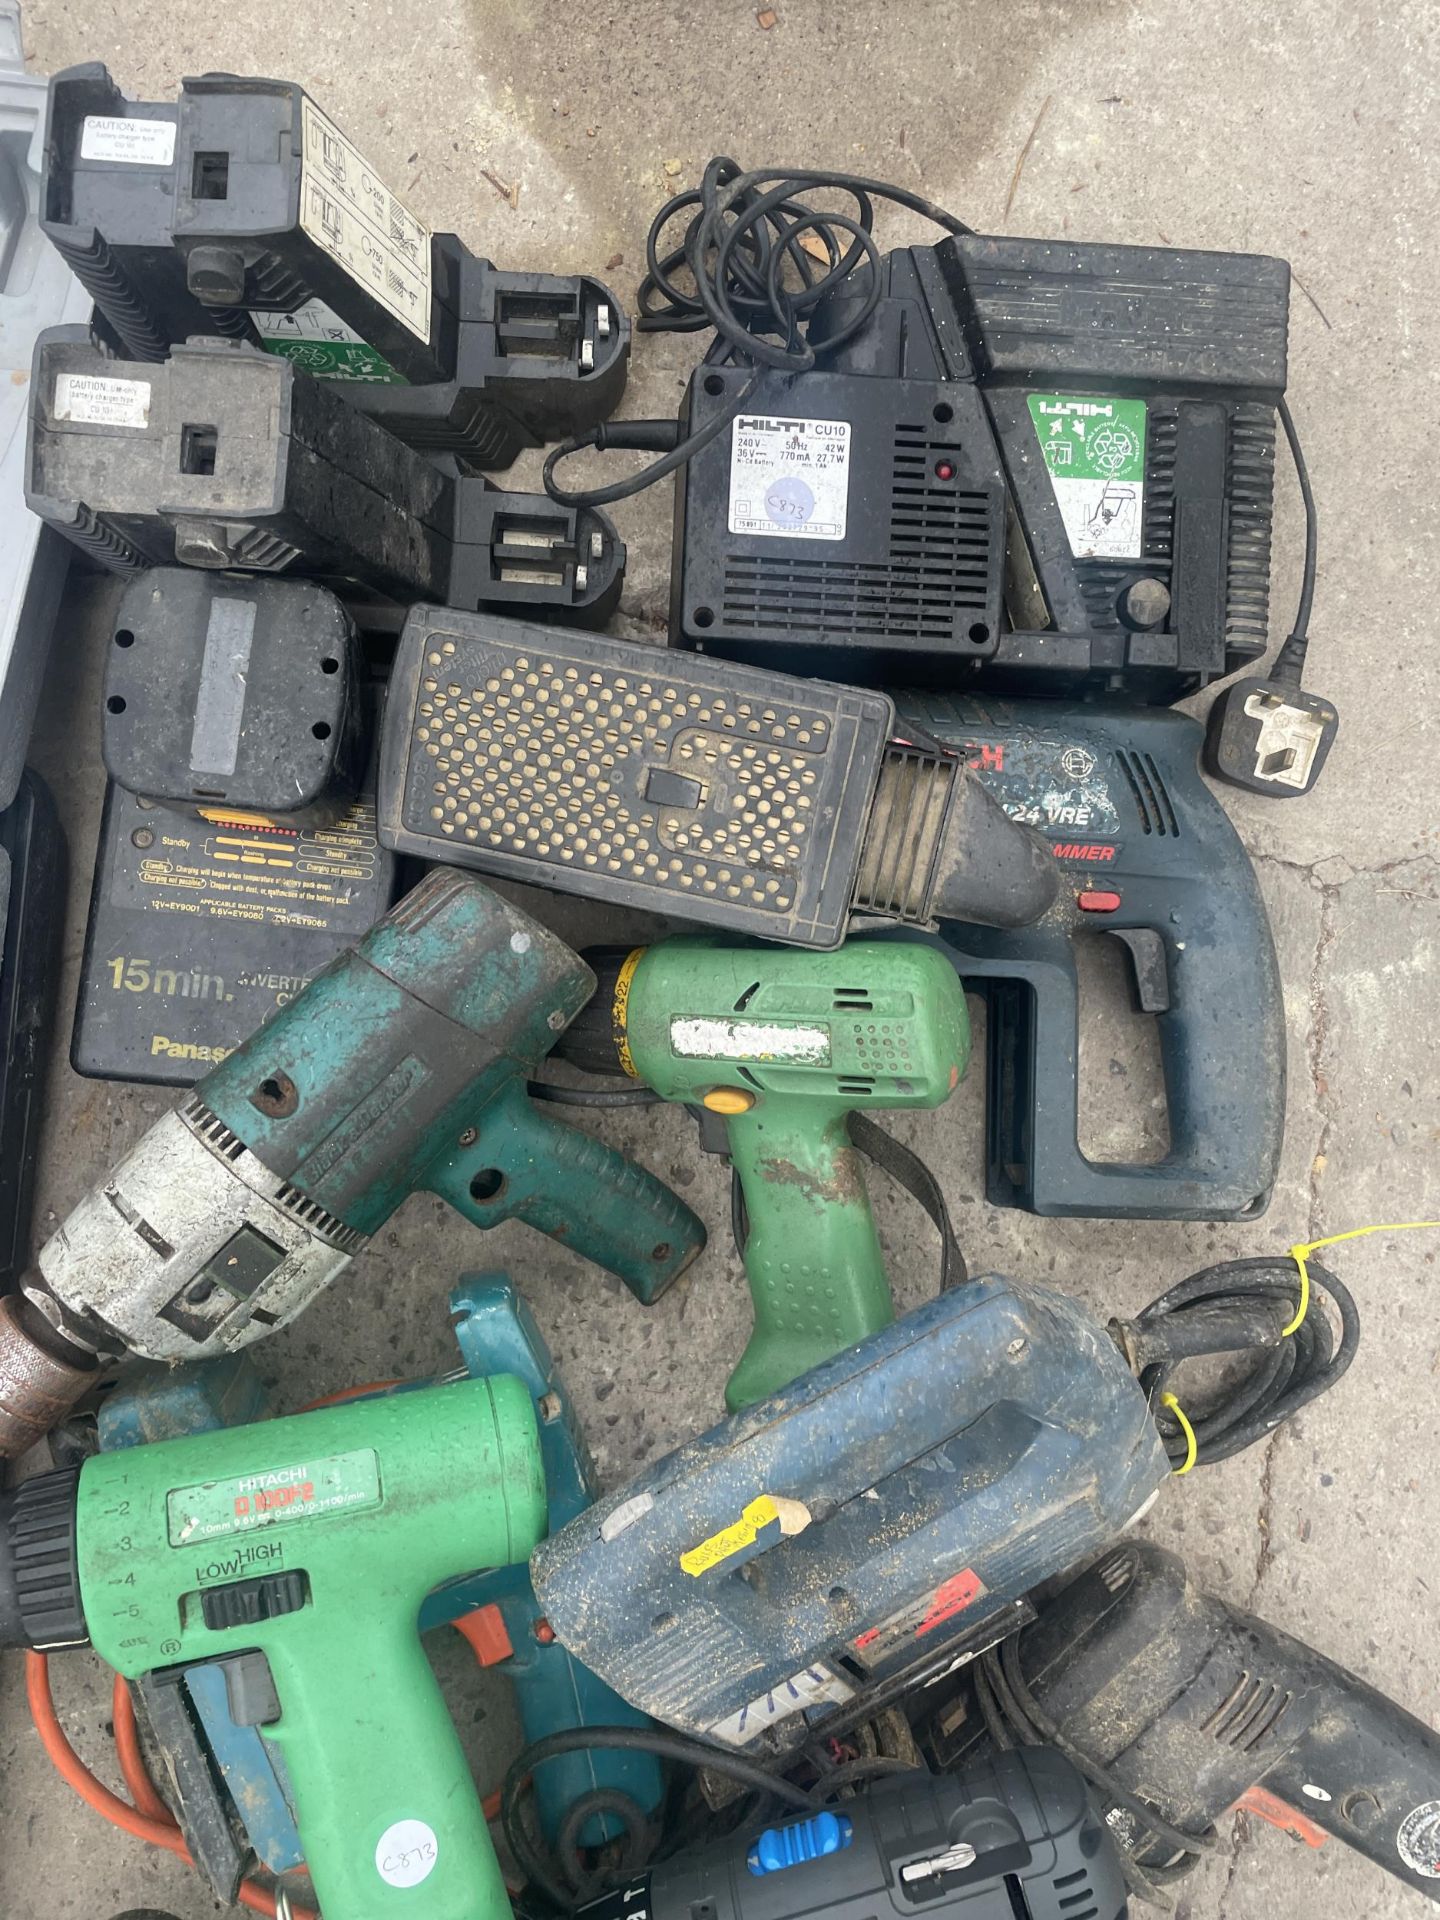 A LARGE QUANTITY OF POWER TOOLS TO INCLUDE DRILLS, JIGSAWS AND A PLANE ETC - Image 2 of 3